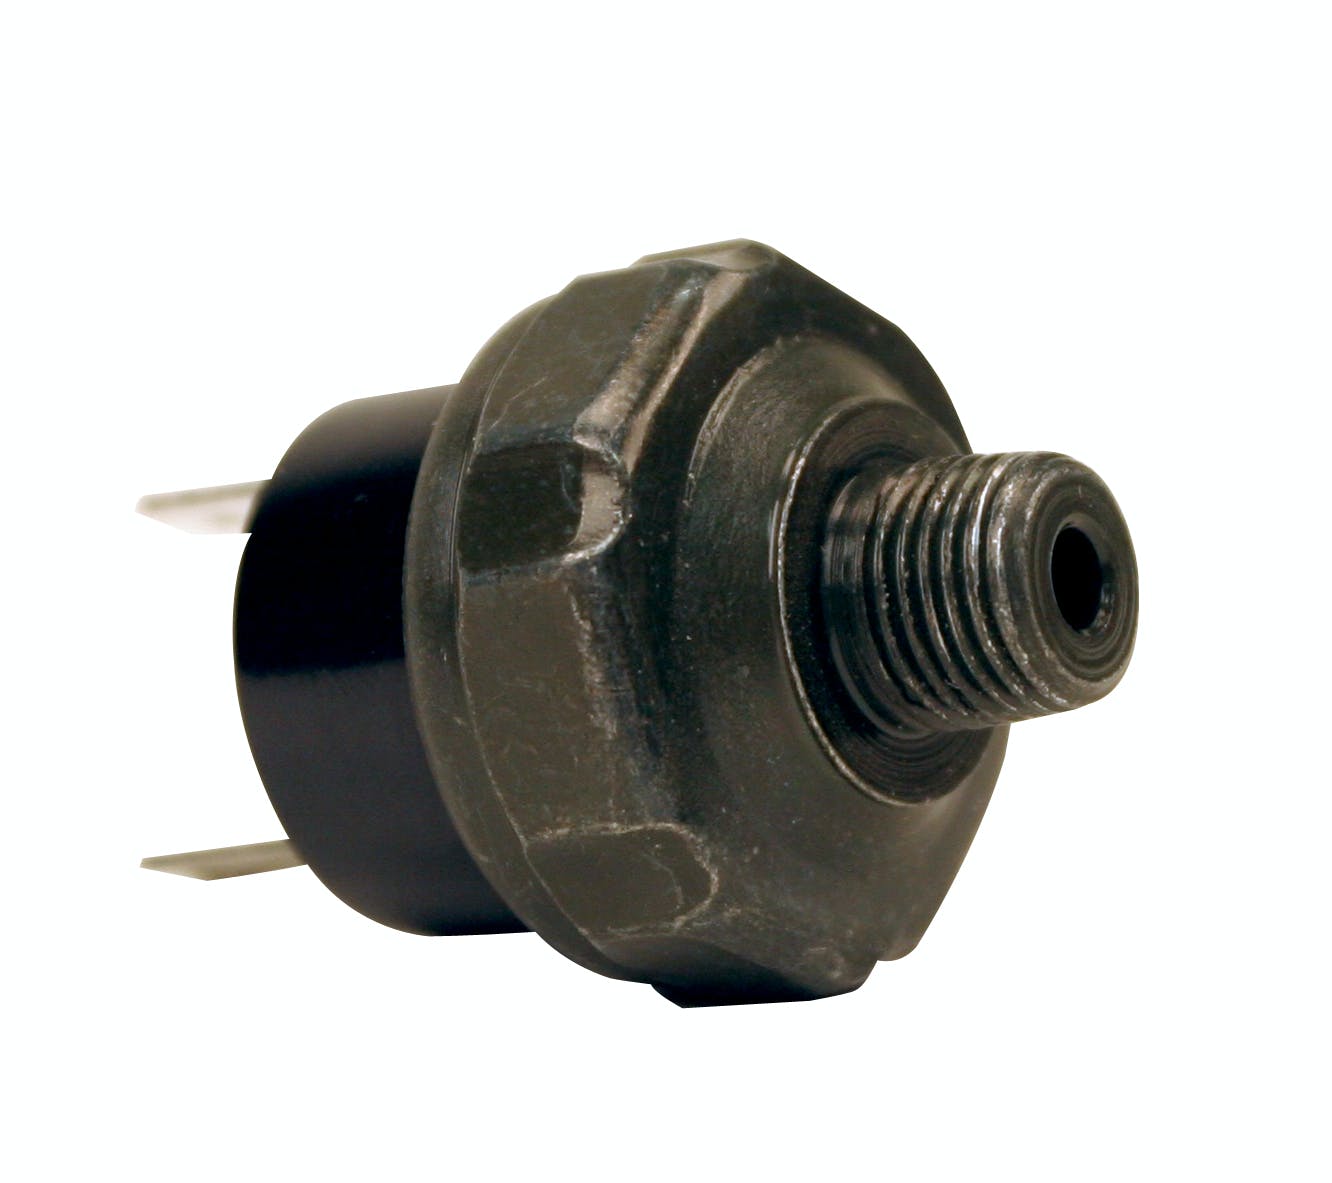 VIAIR 90100 Pressure Switch  1/8in M NPT Port  1/4in Spade Connectors 90 psi On  120 ps